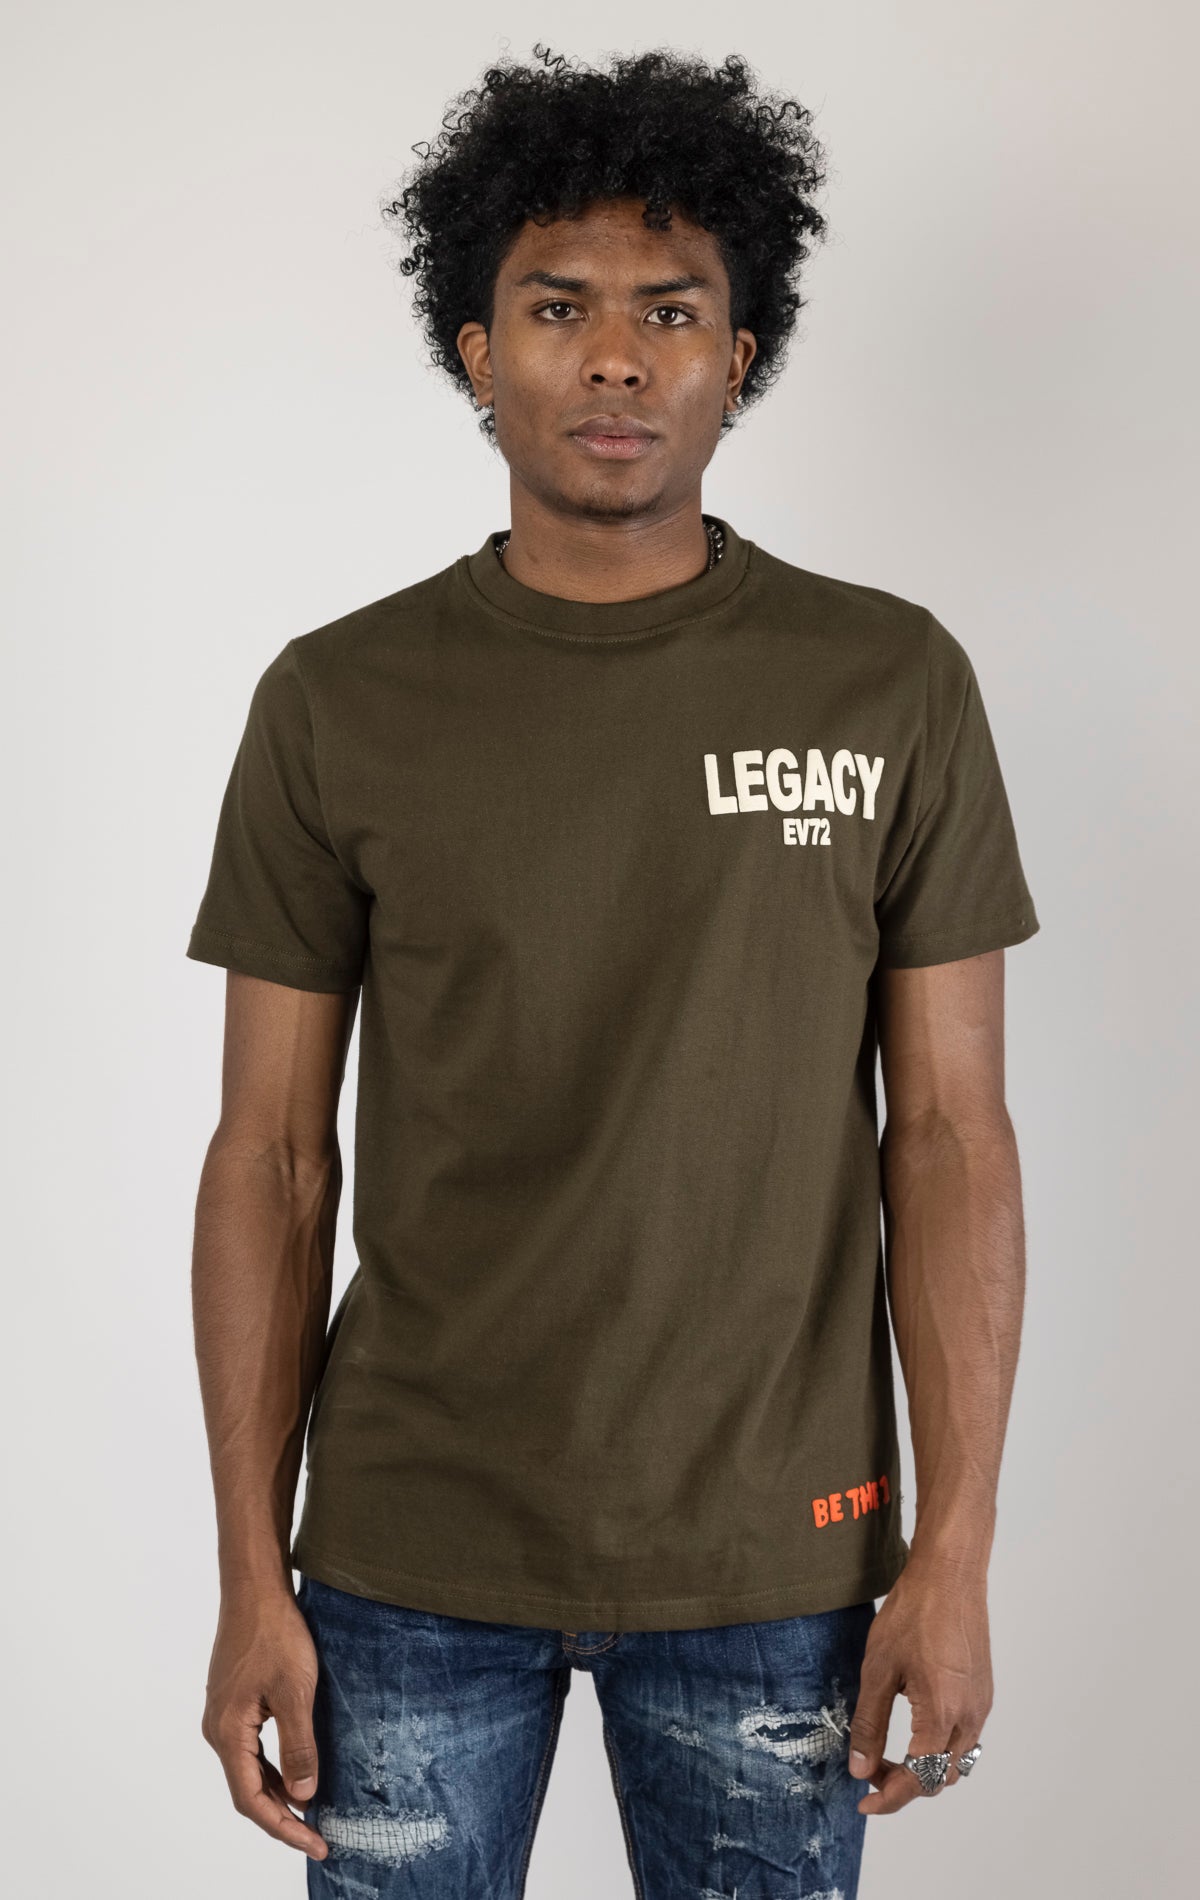 Men's crew neck t-shirt in a solid olive green color. The shirt has short sleeves and is made from 100% cotton.  